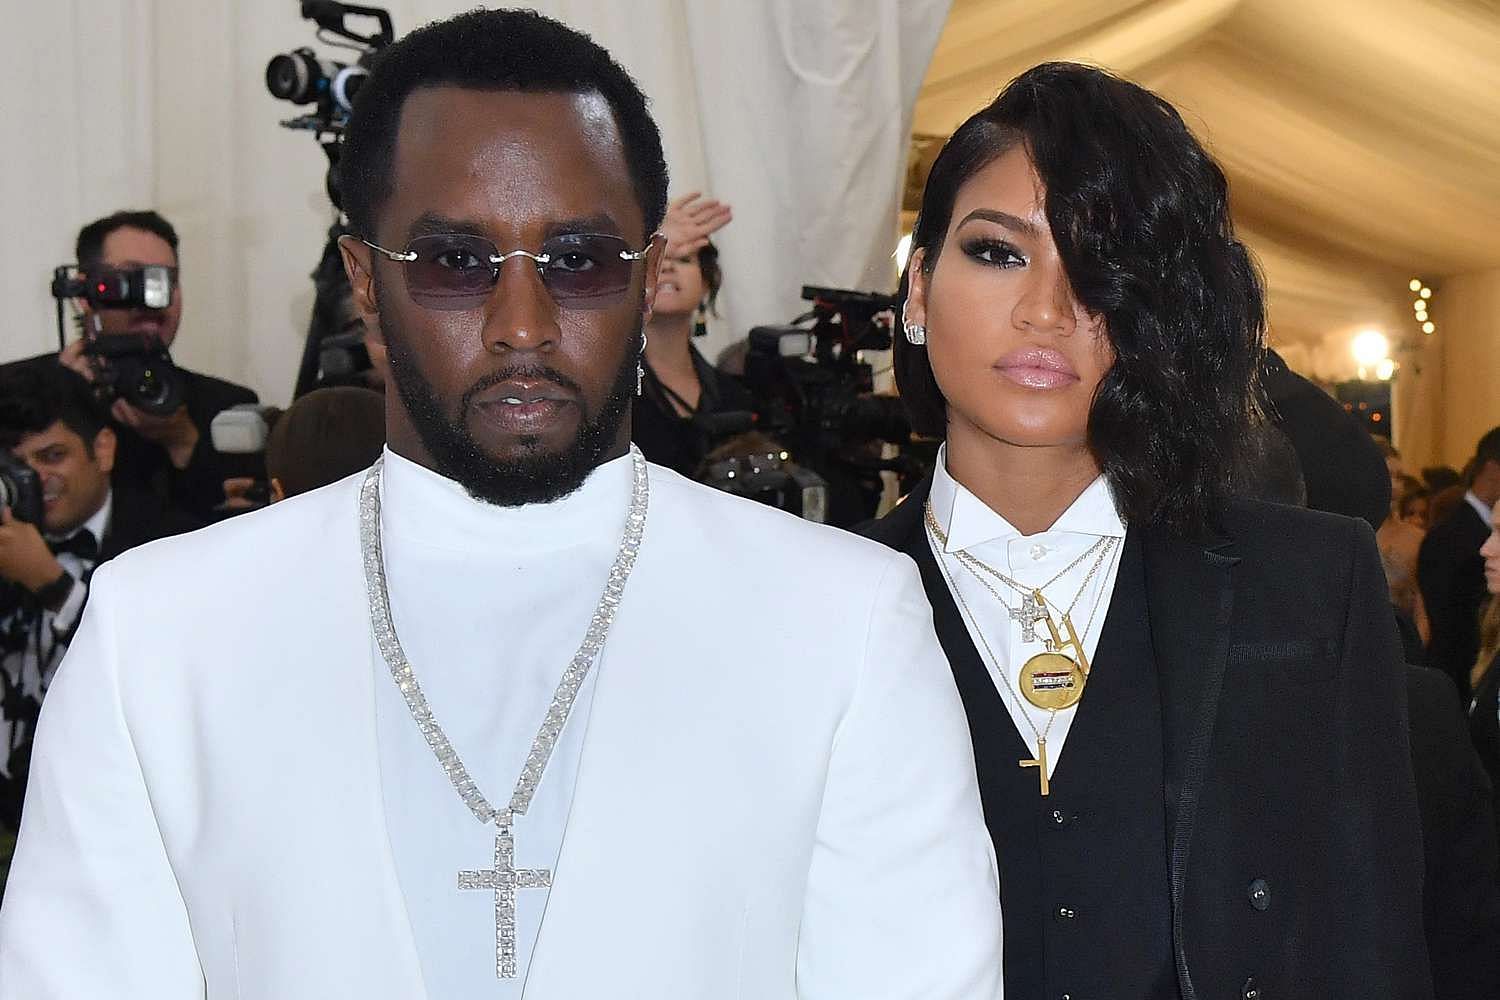 Details about Cassie and Diddy